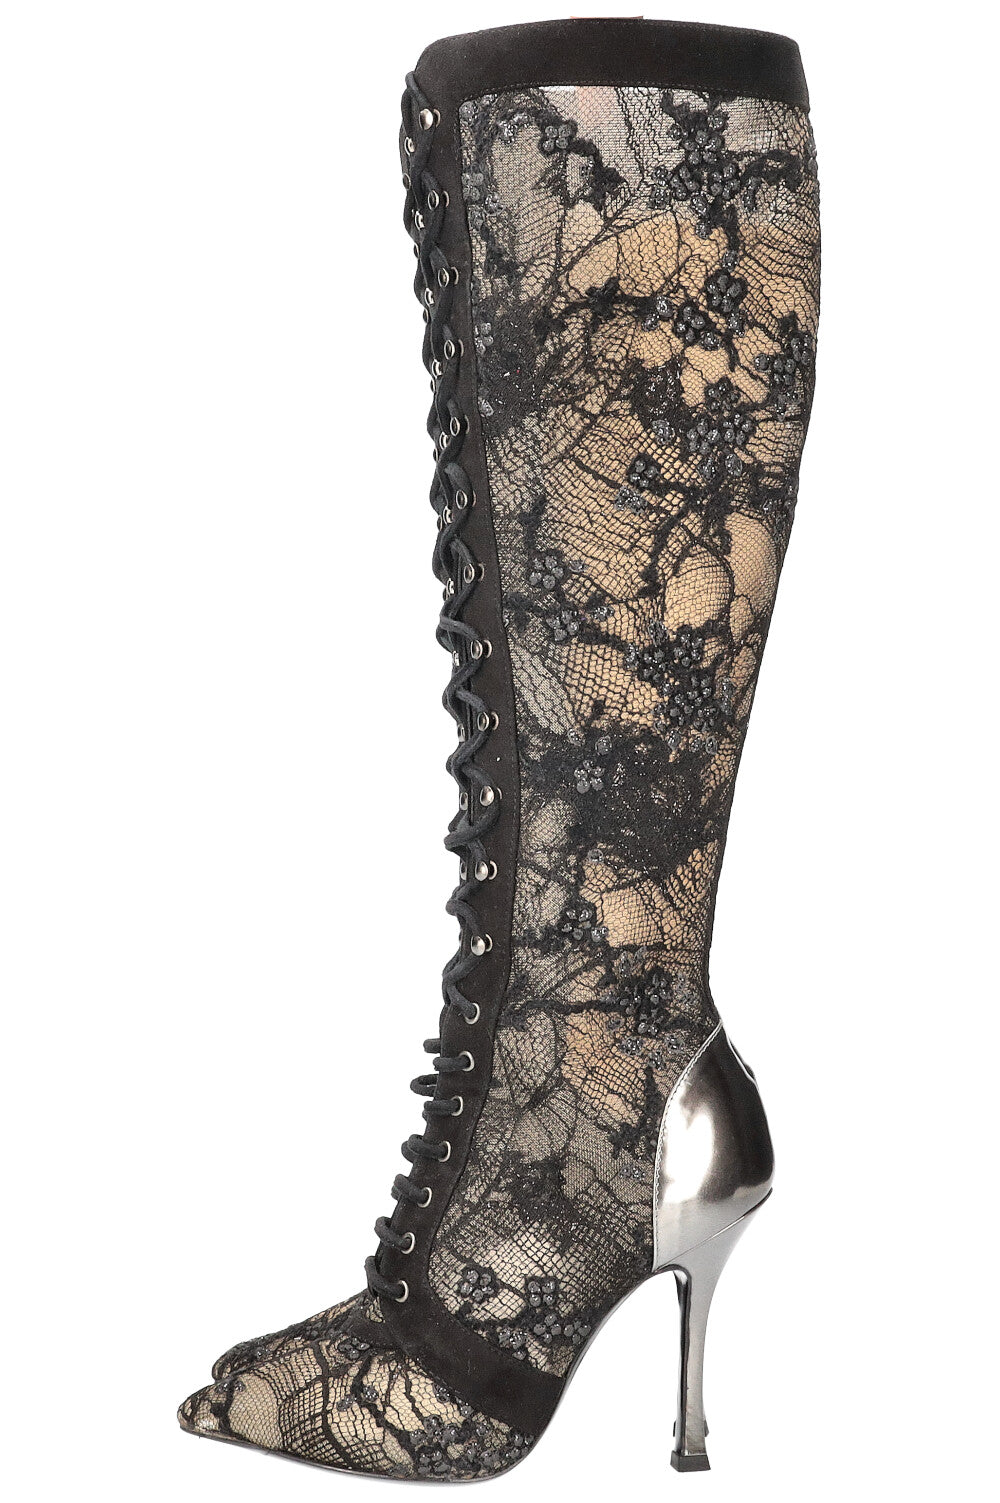 SERGIO ROSSI Lace & Crystal Boots Black